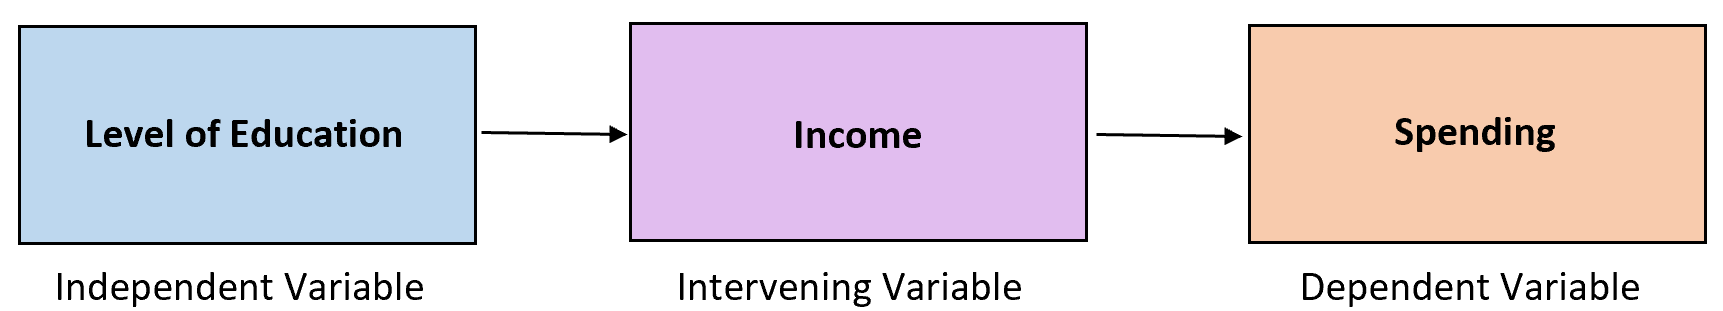 Example of intervening variable